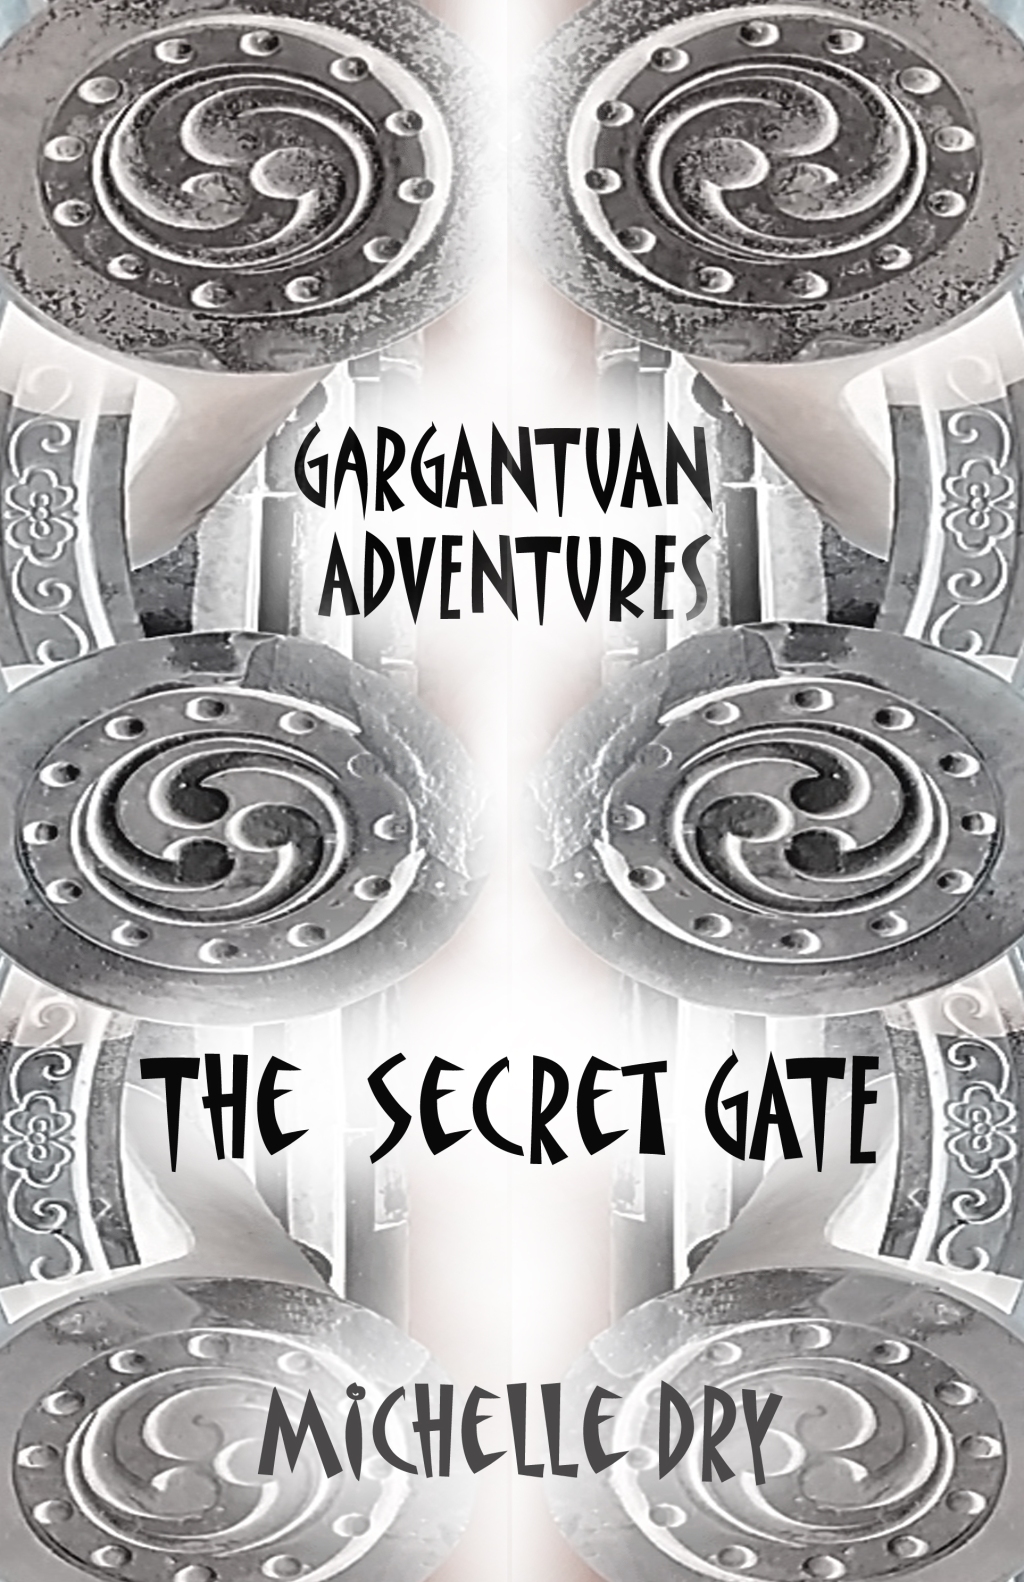 5 DAYS TO GO UNTIL GARGANTUAN ADVENTURES IS AVAILABLE ON AMAZON!